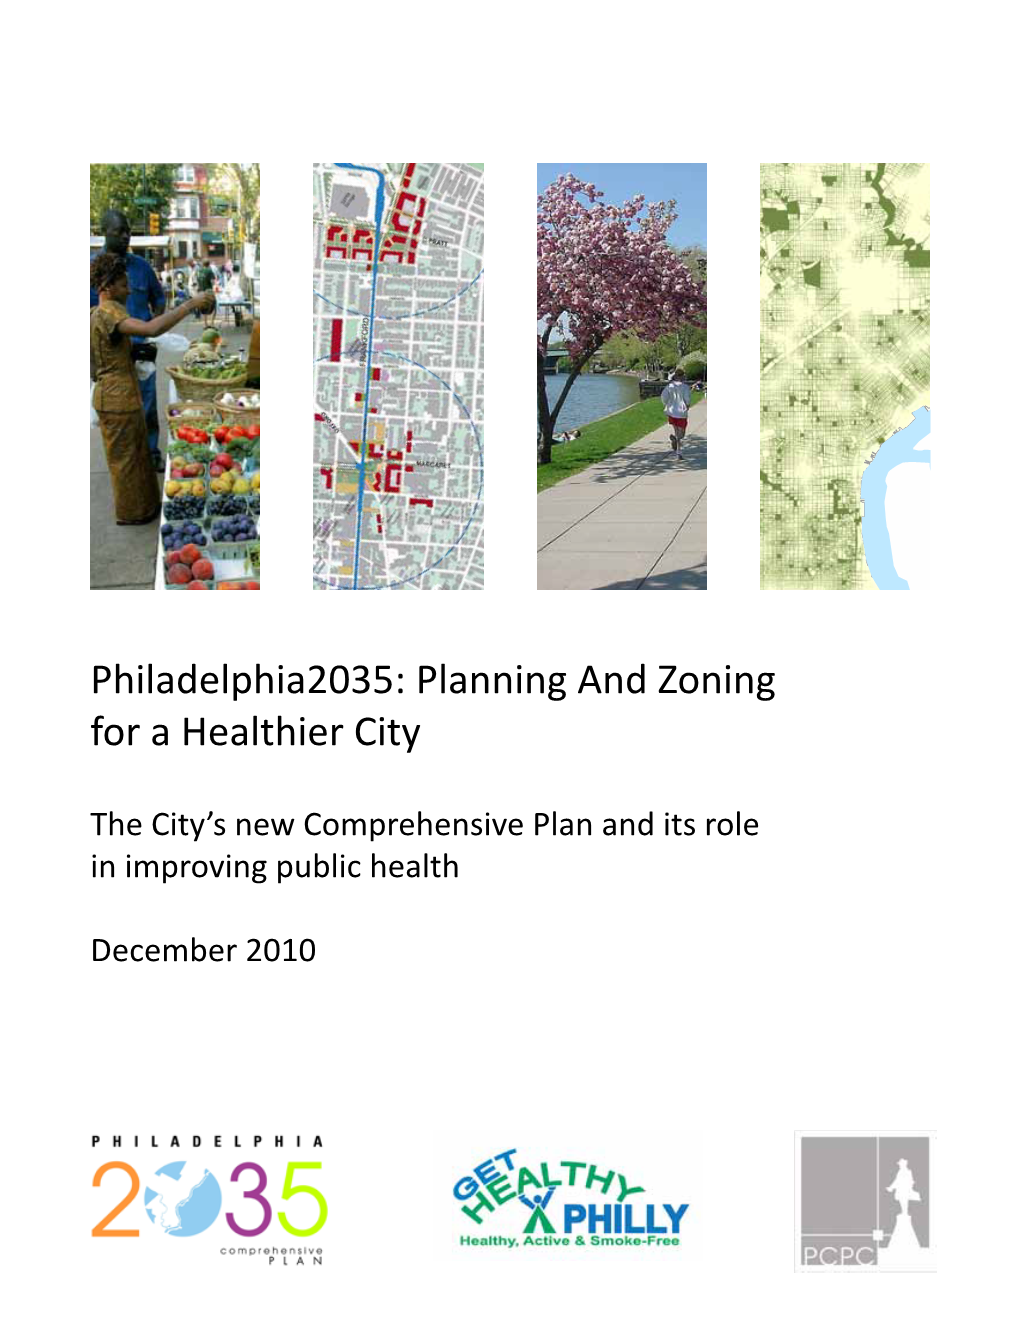 Philadelphia2035: Planning and Zoning for a Healthier City